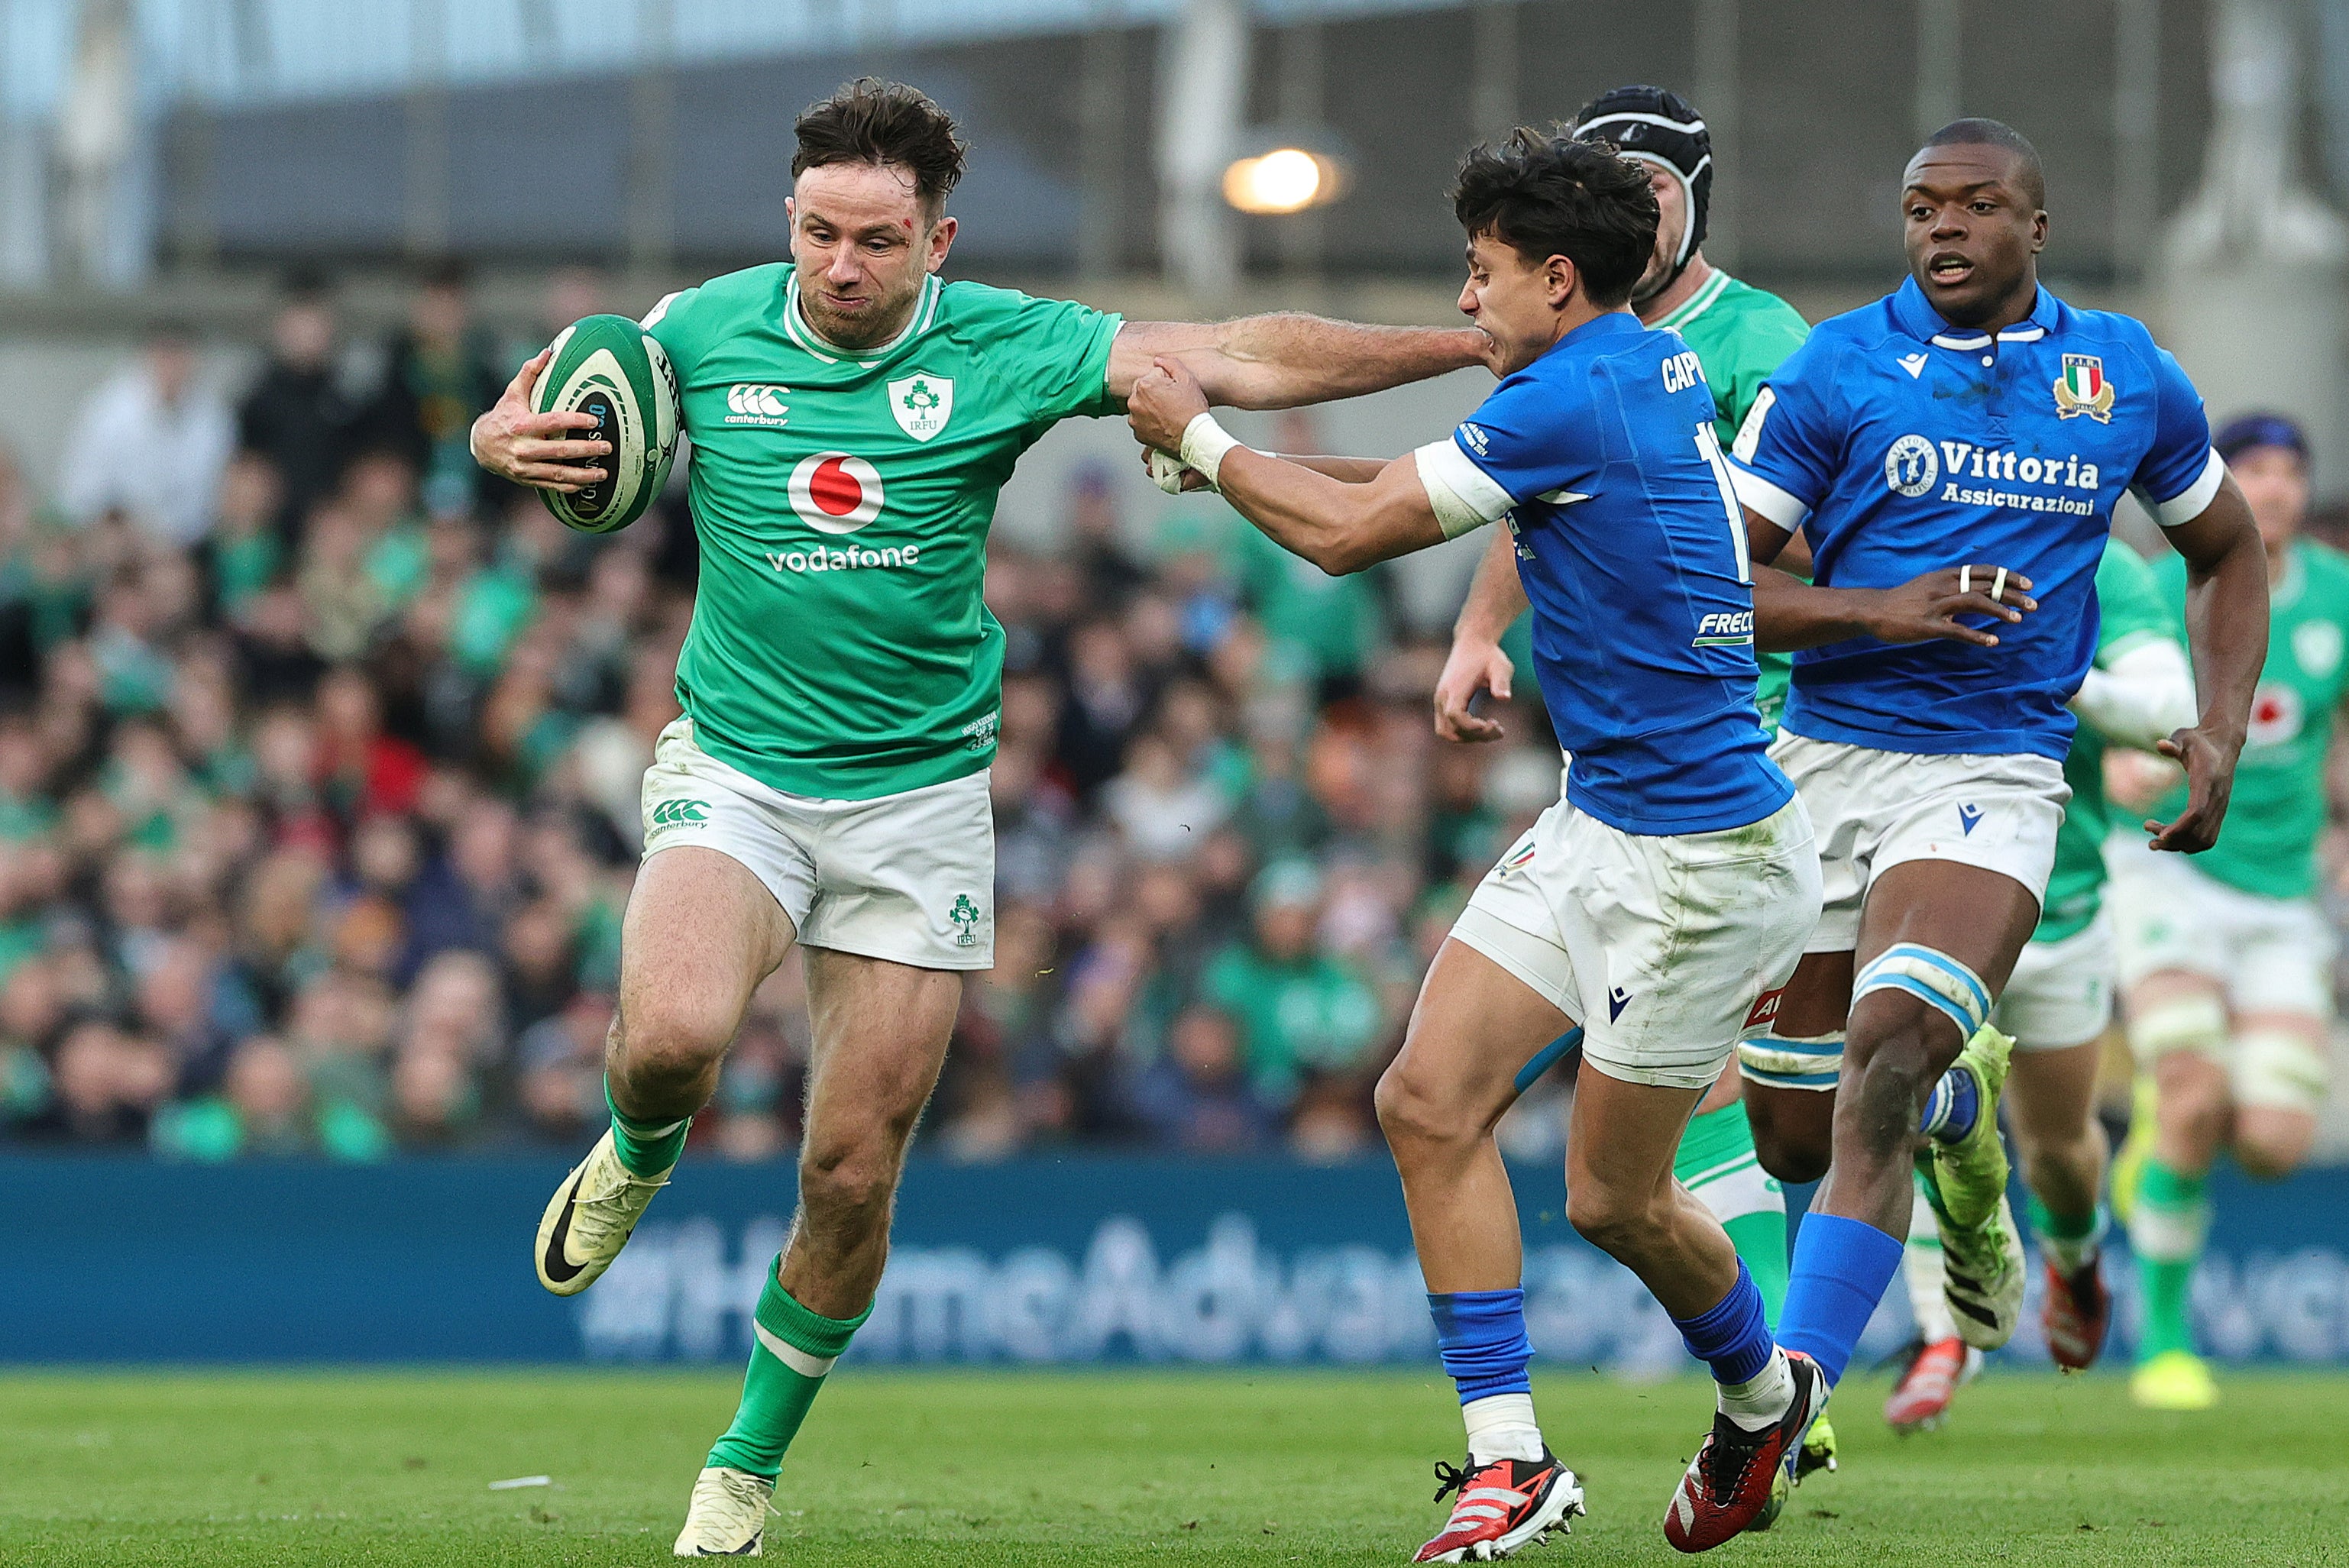 Hugo Keenan is back in the Ireland side to face England